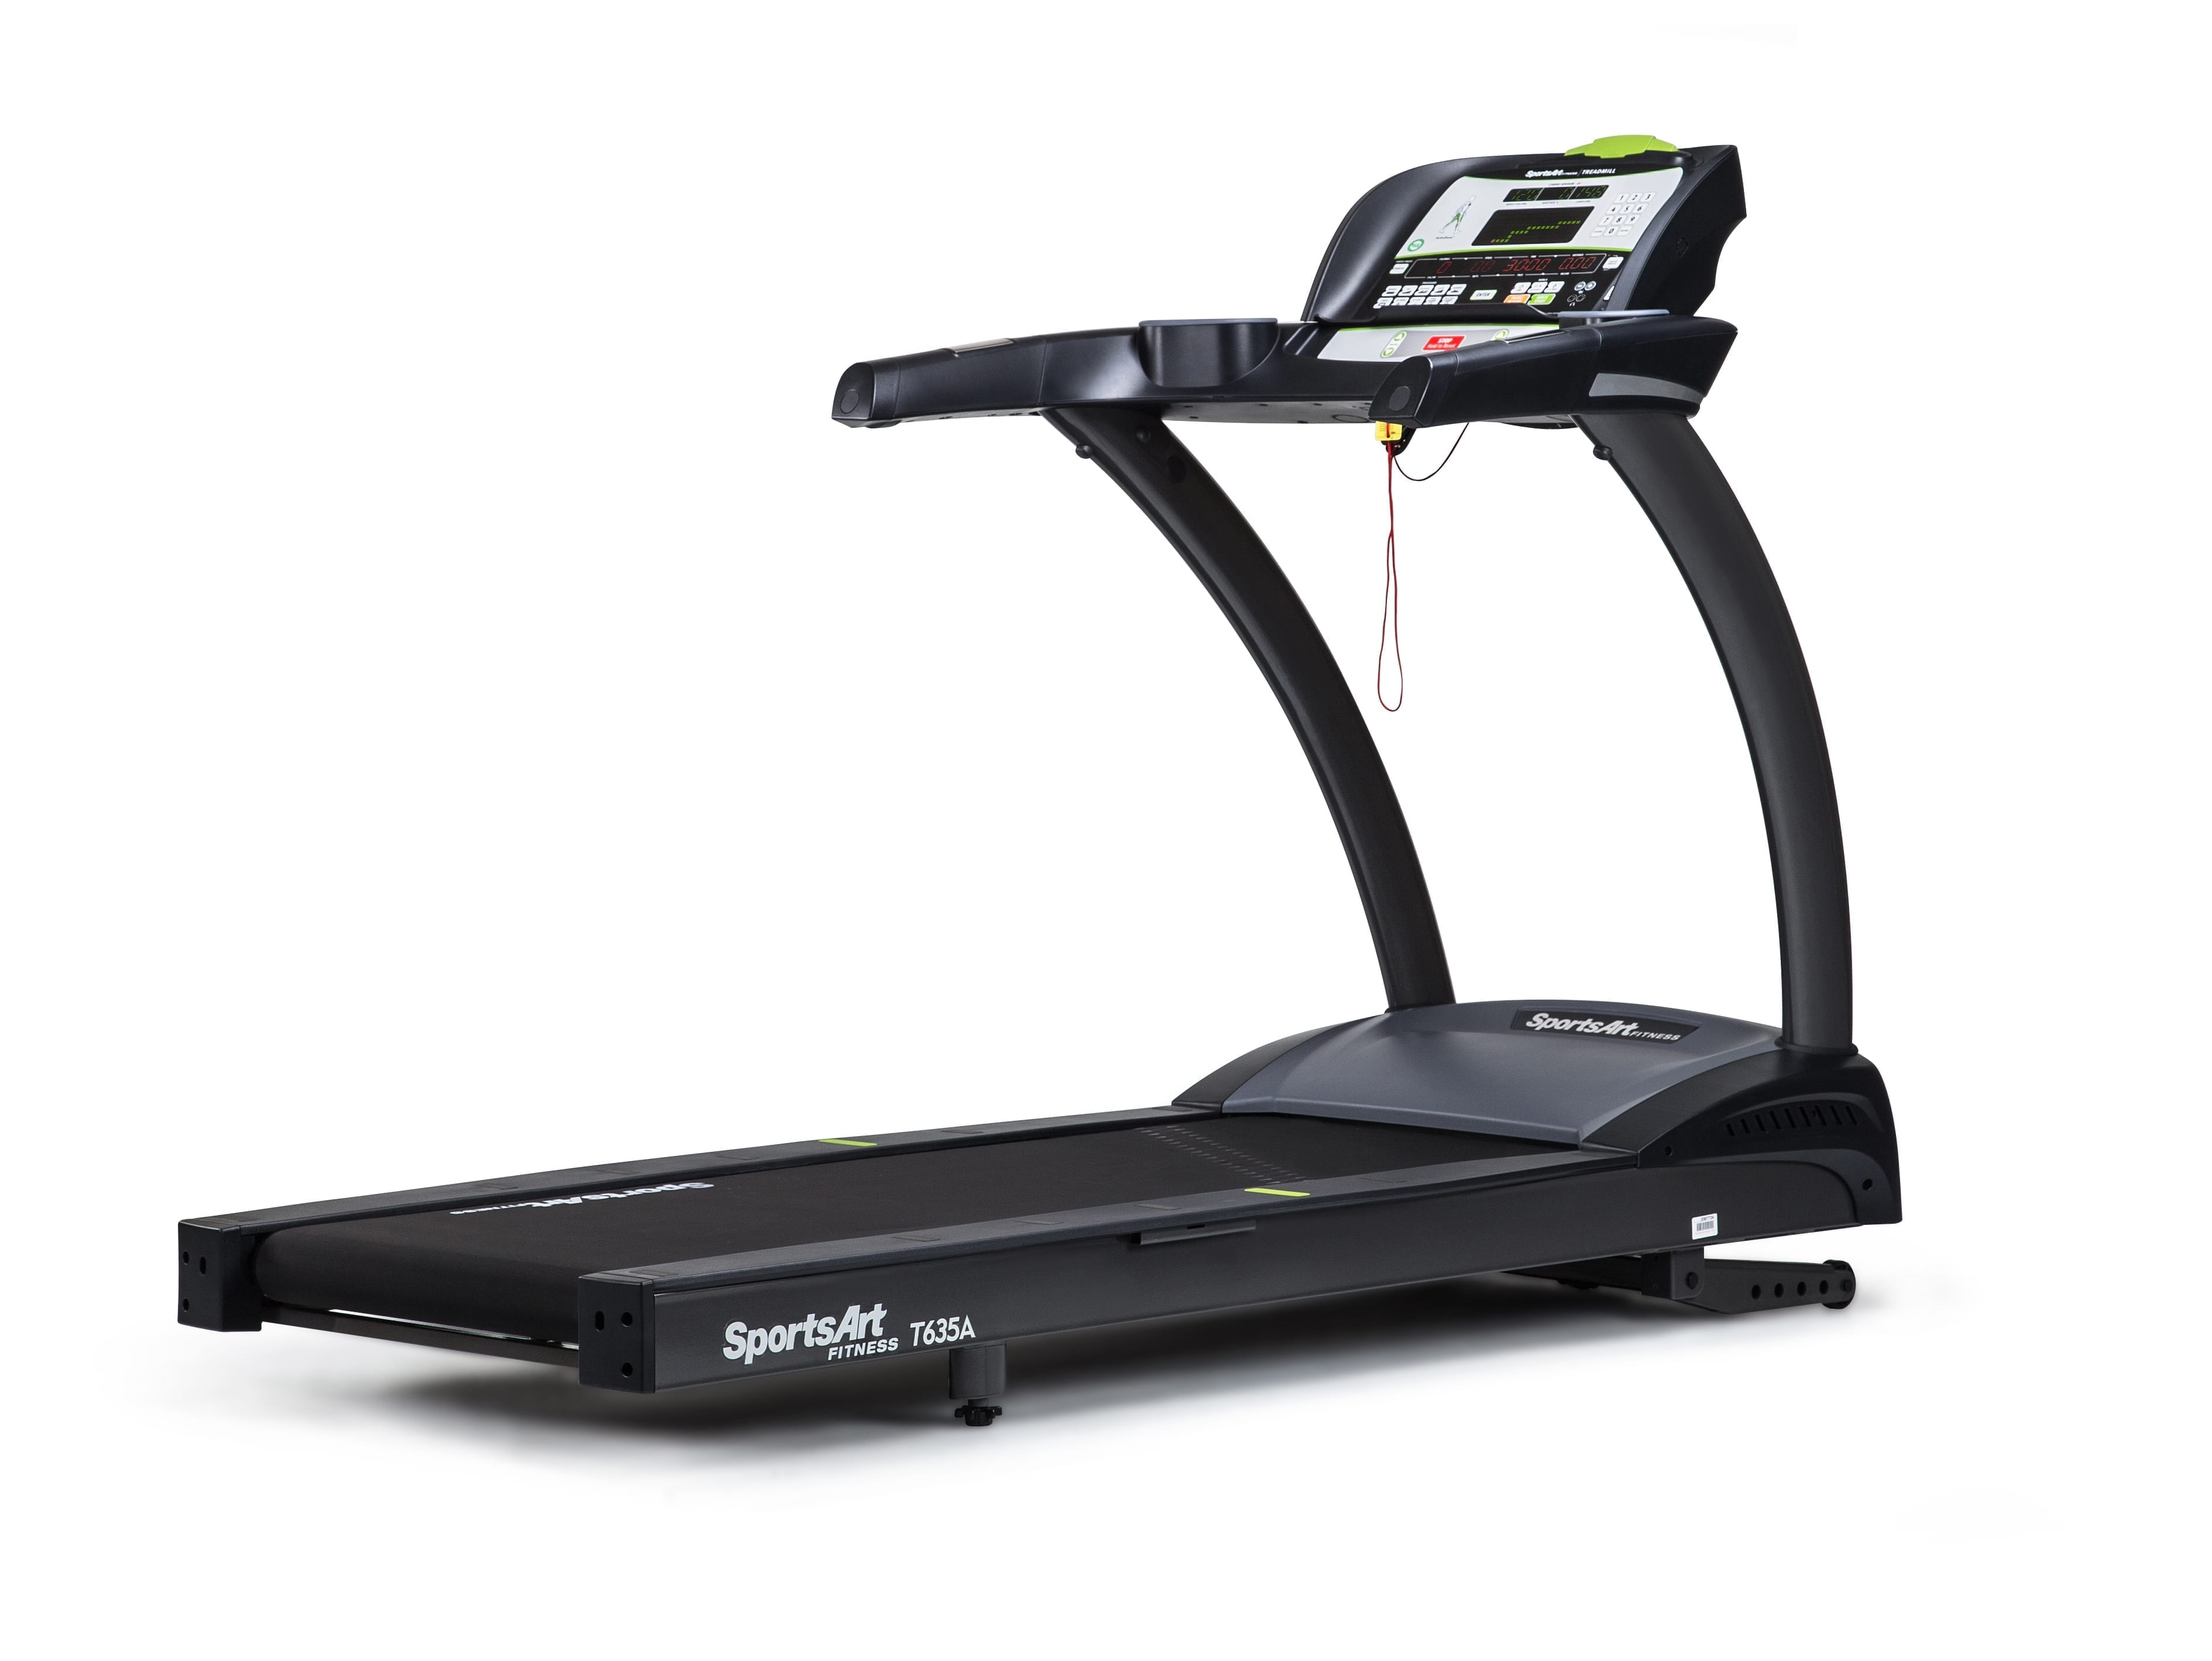 SportsArt Foundation Ac Motor Treadmill T635A side angle back facing view